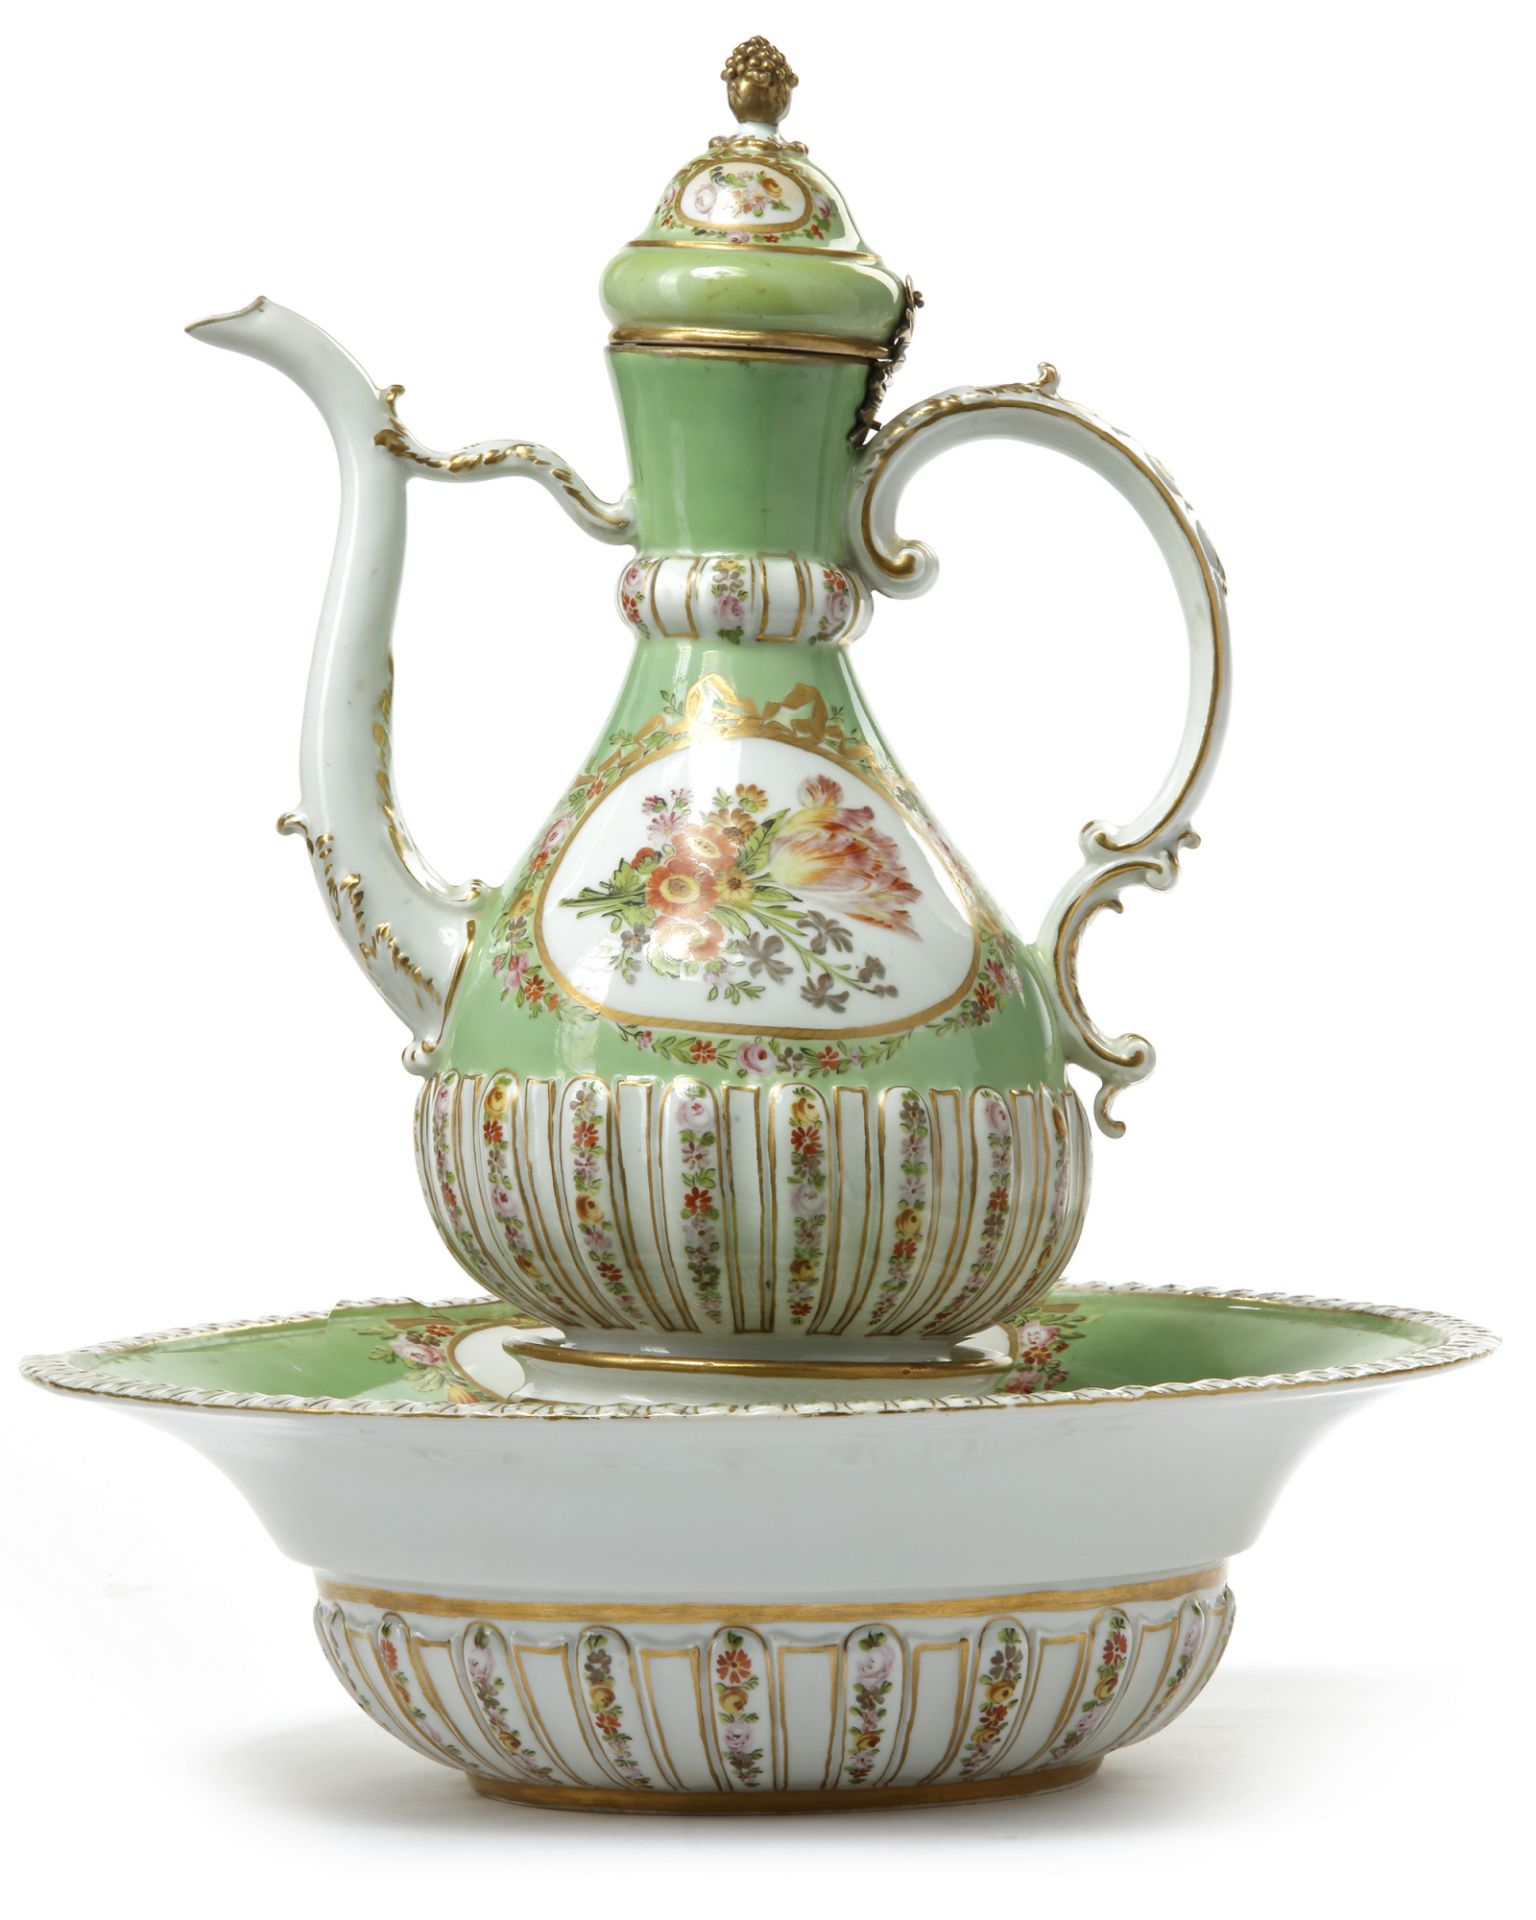 MEISSEN MARCOLINI PERIOD EWER AND BASIN( LEGEN-IBRIK) MARKED COUNT MARCOLINI (1774-1814) MADE FOR TH - Image 2 of 12